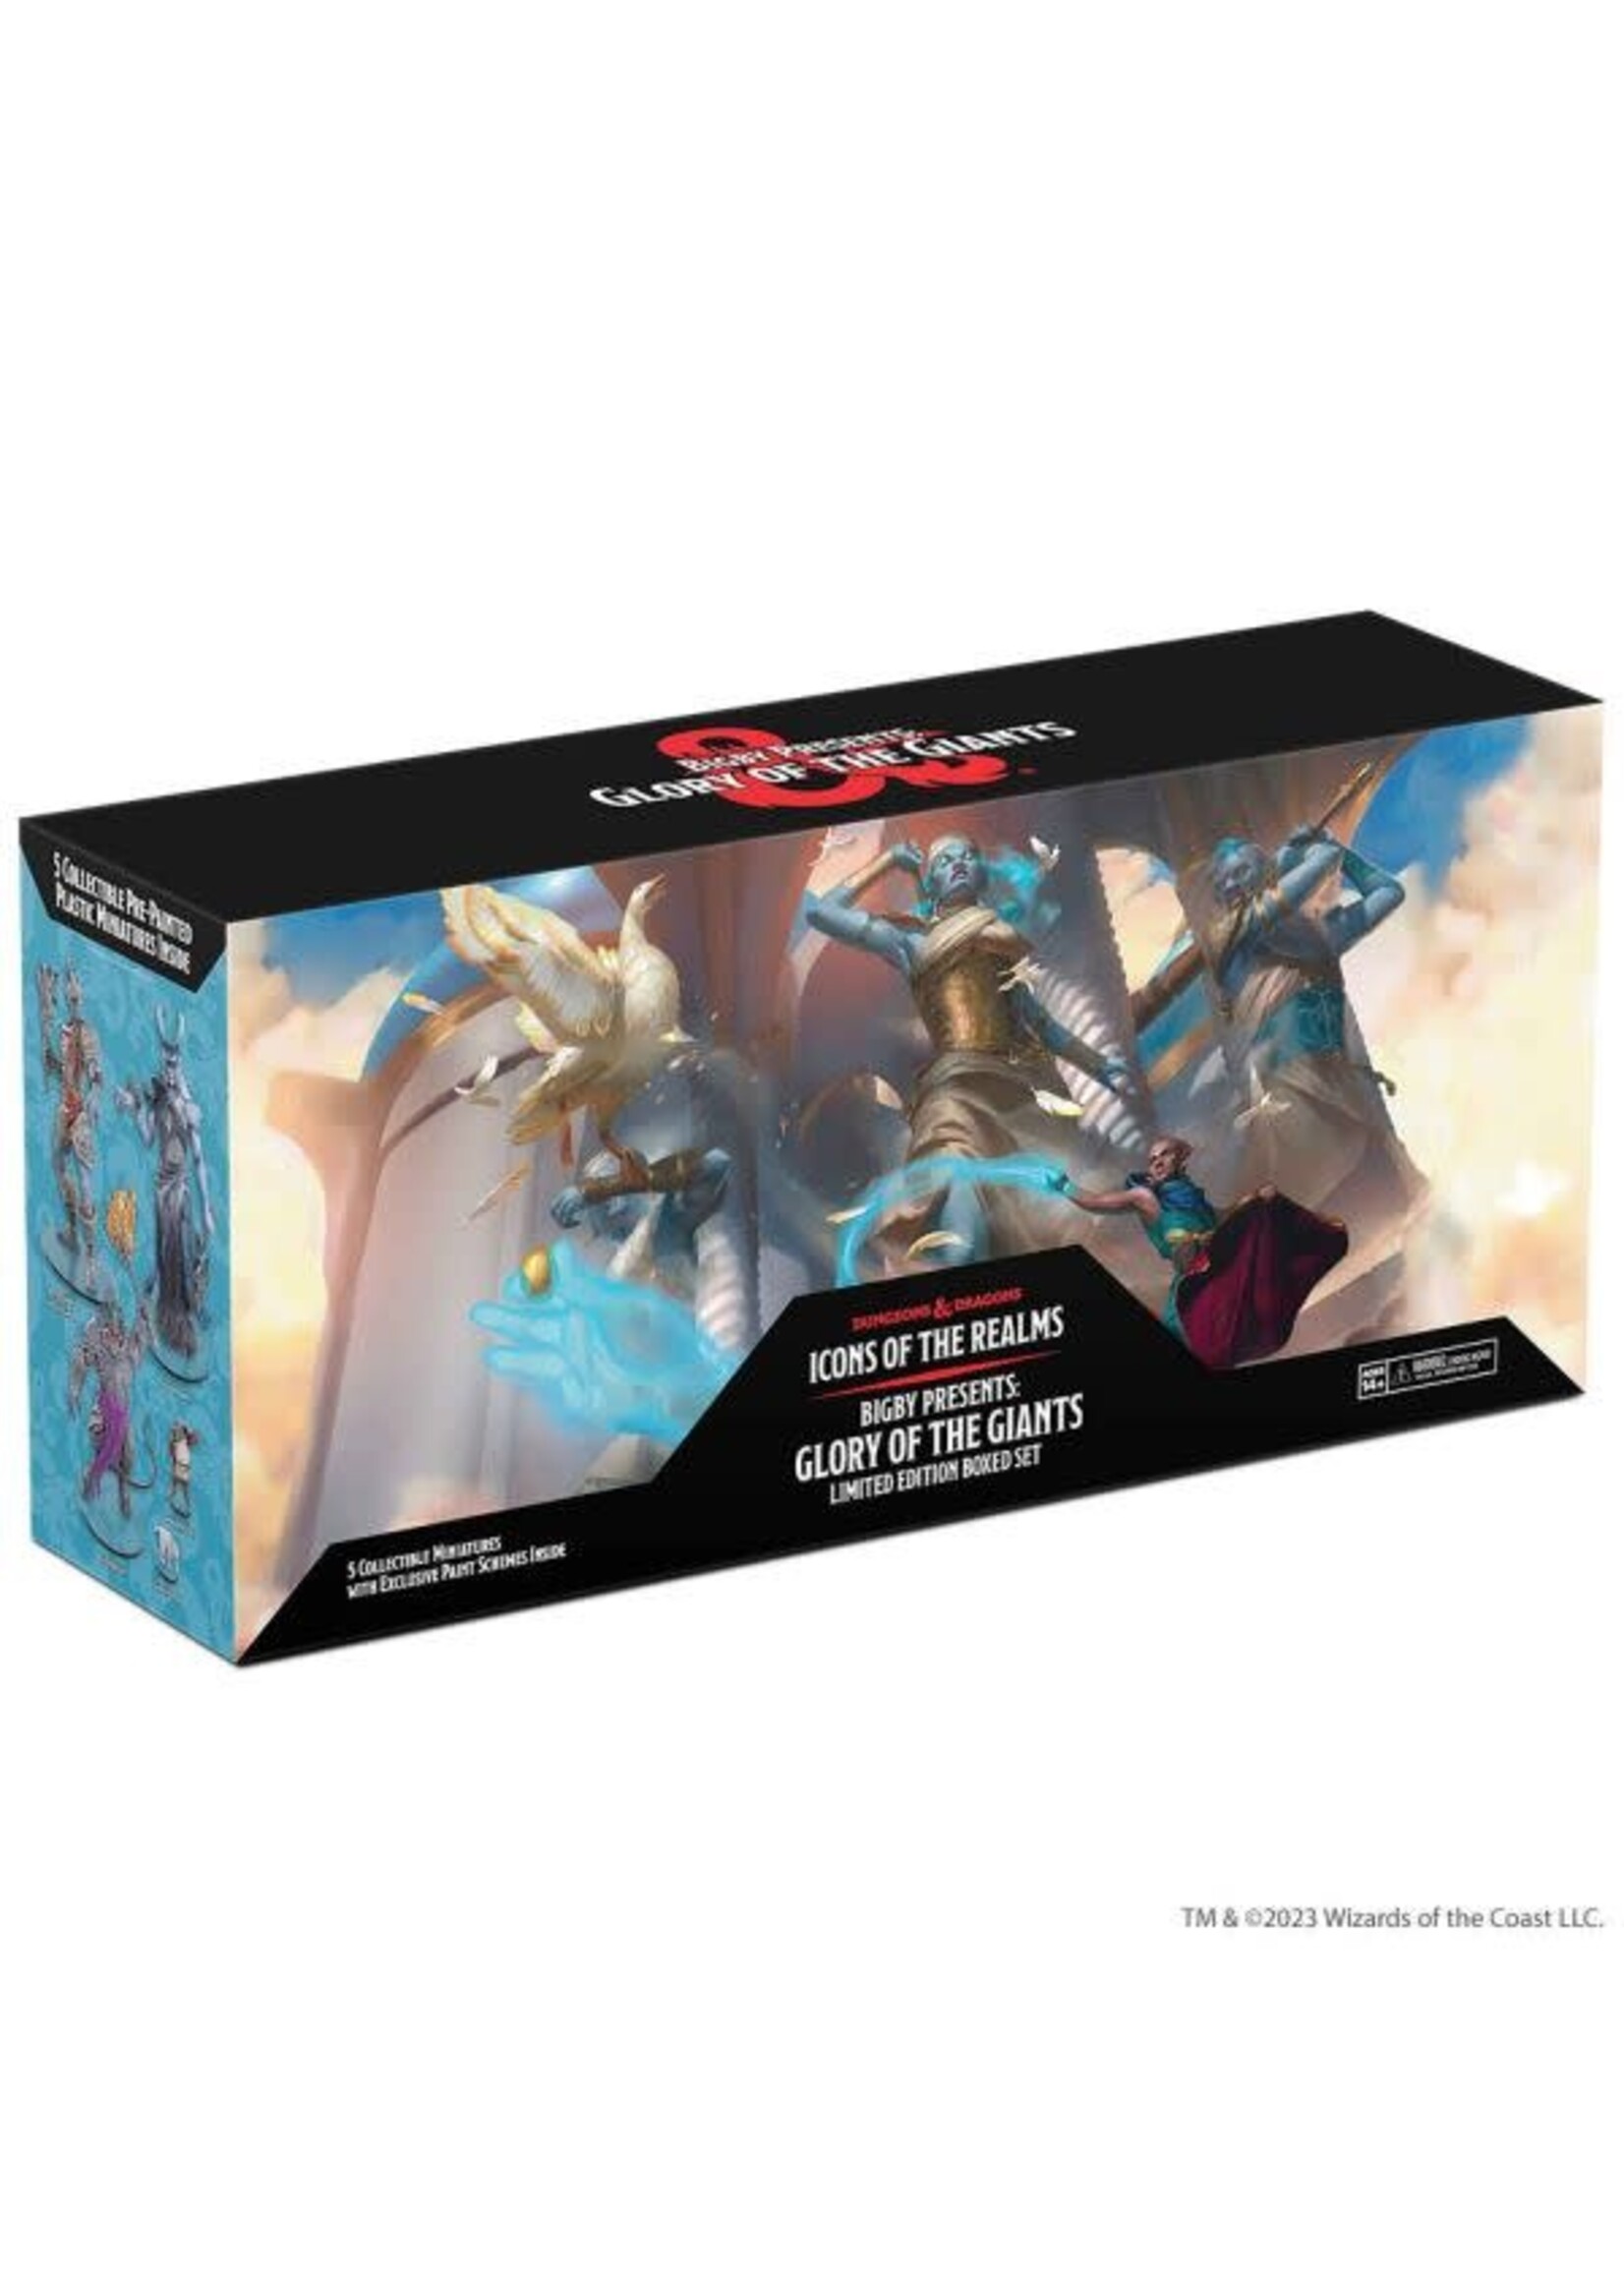 WizKids D&D Icons of the Realms Set 27 Bigby Presents Glory of the Giants - Limited Edition Boxed Set